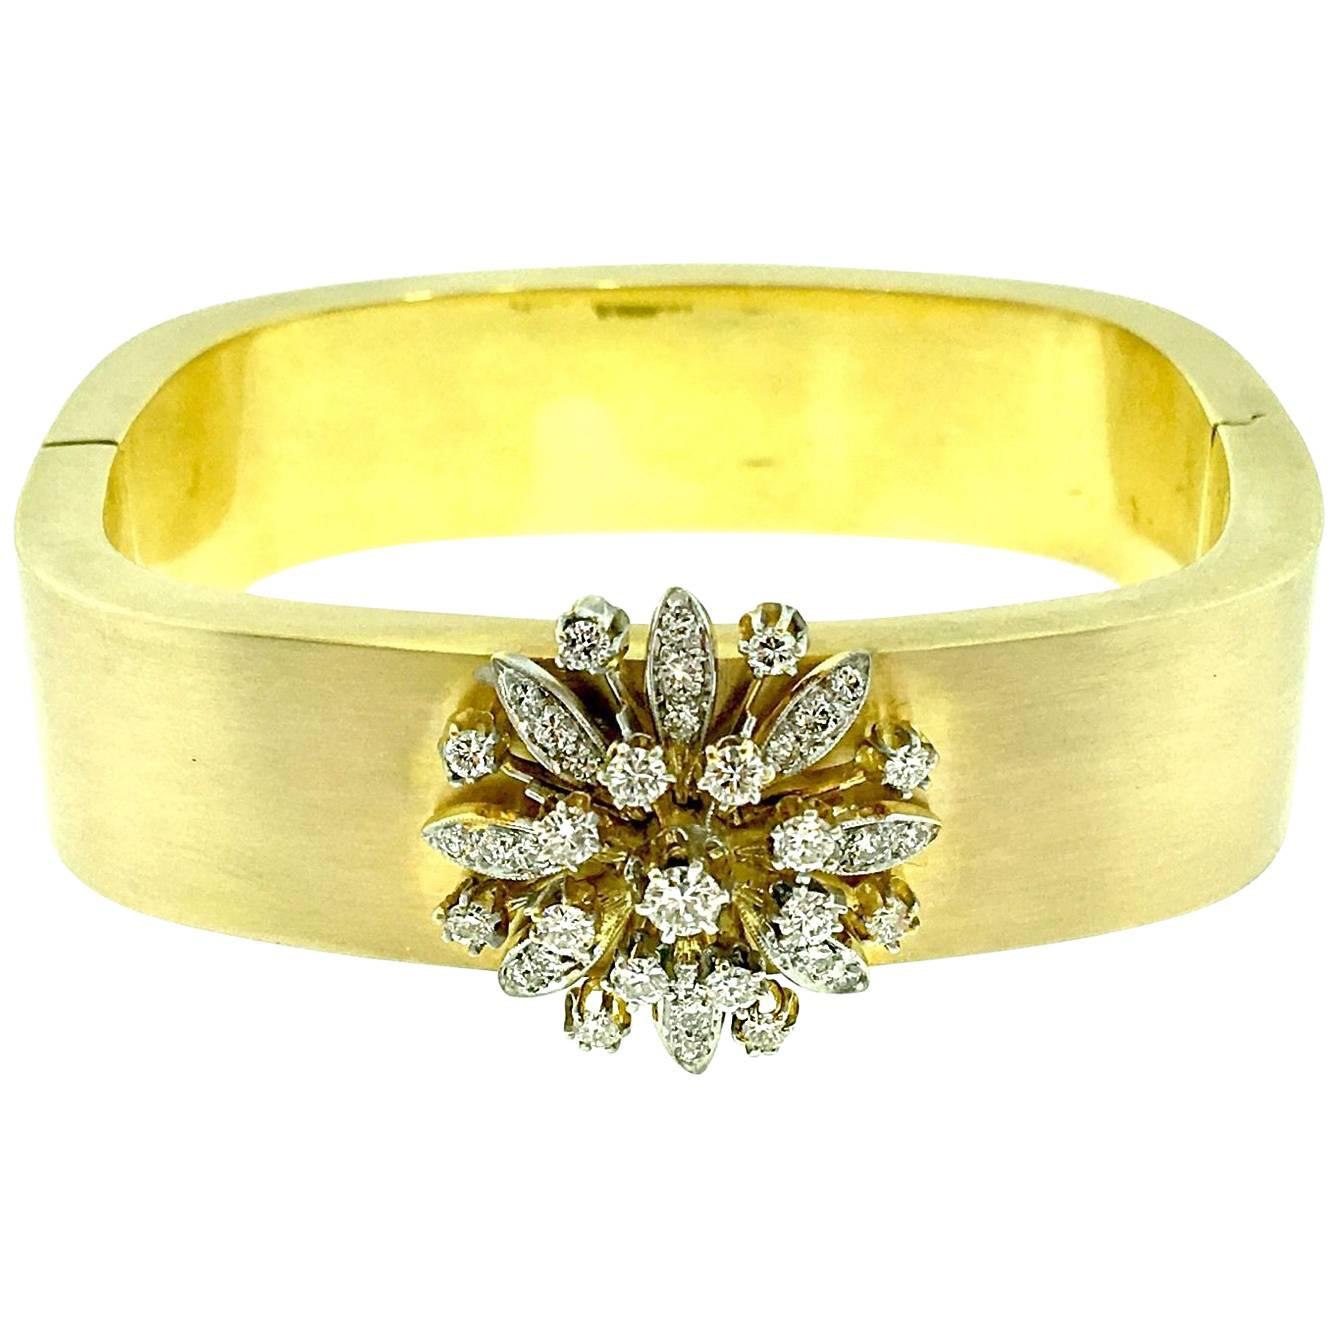 Vintage Wide Bangle with Diamond Floret in 14K Yellow Gold